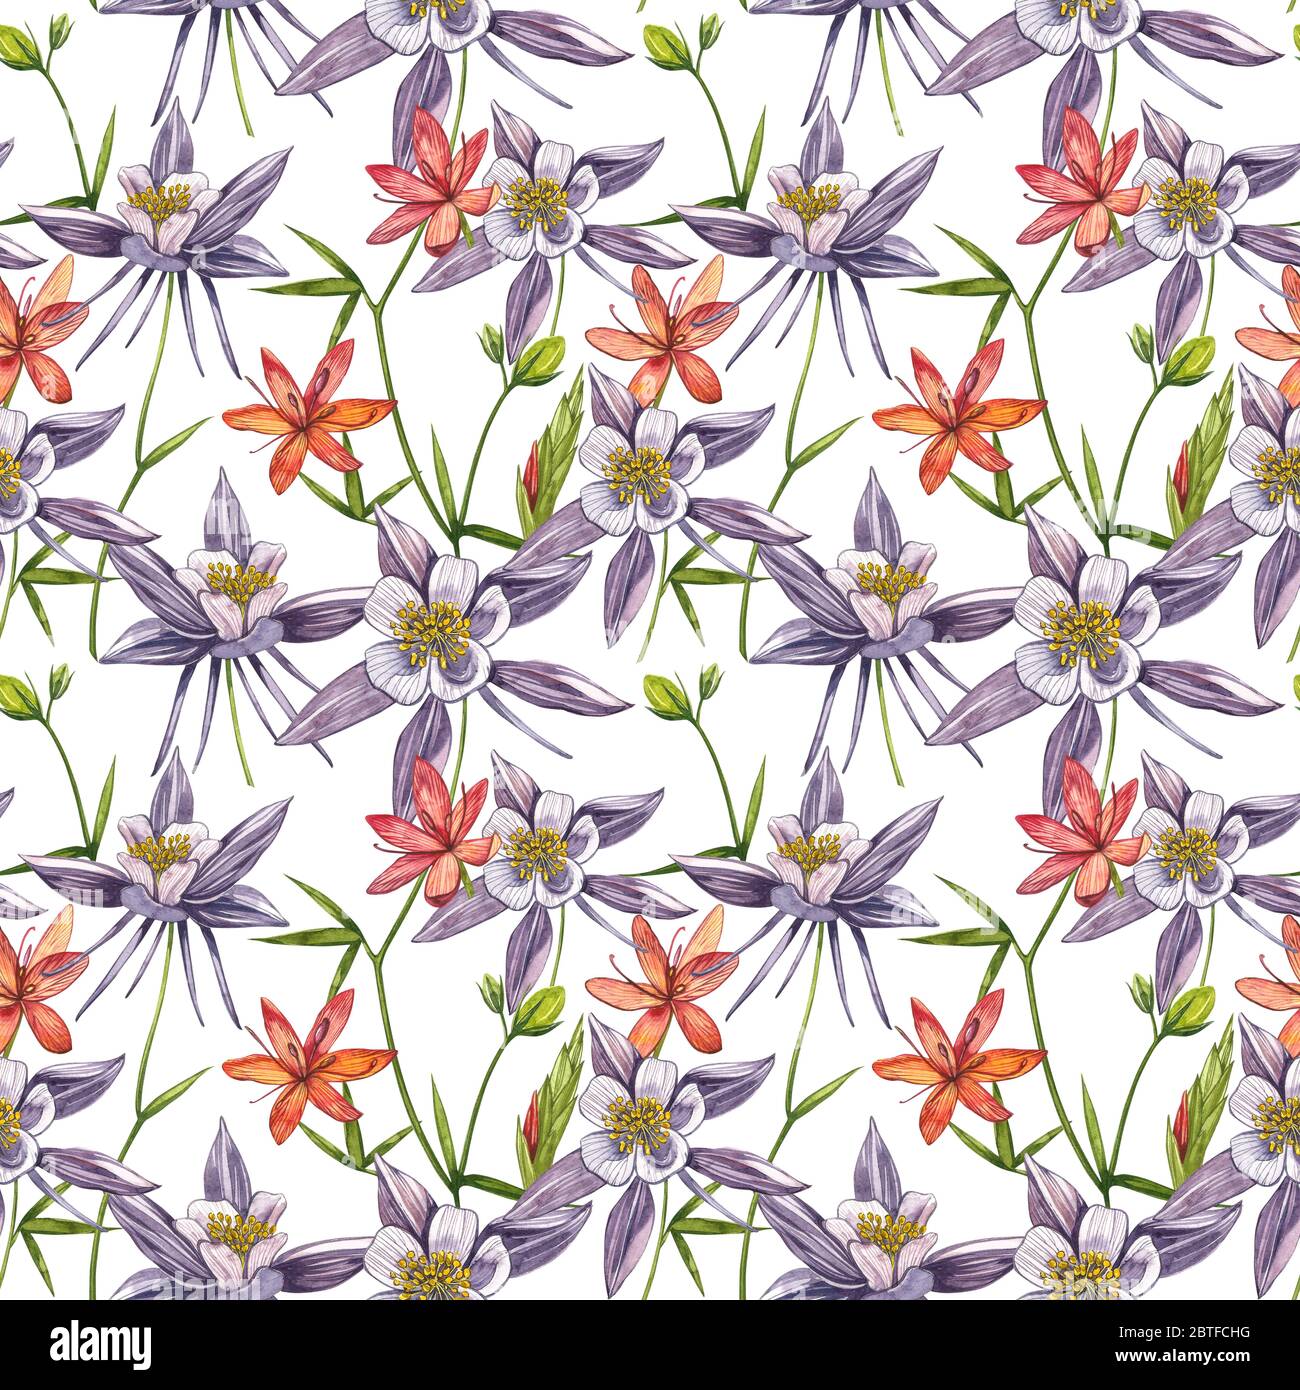 Double Columbine flowers. Seamless pattern. Collection of hand drawn flowers and plants. Watercolor set of flowers and leaves, hand drawn floral illus Stock Photo